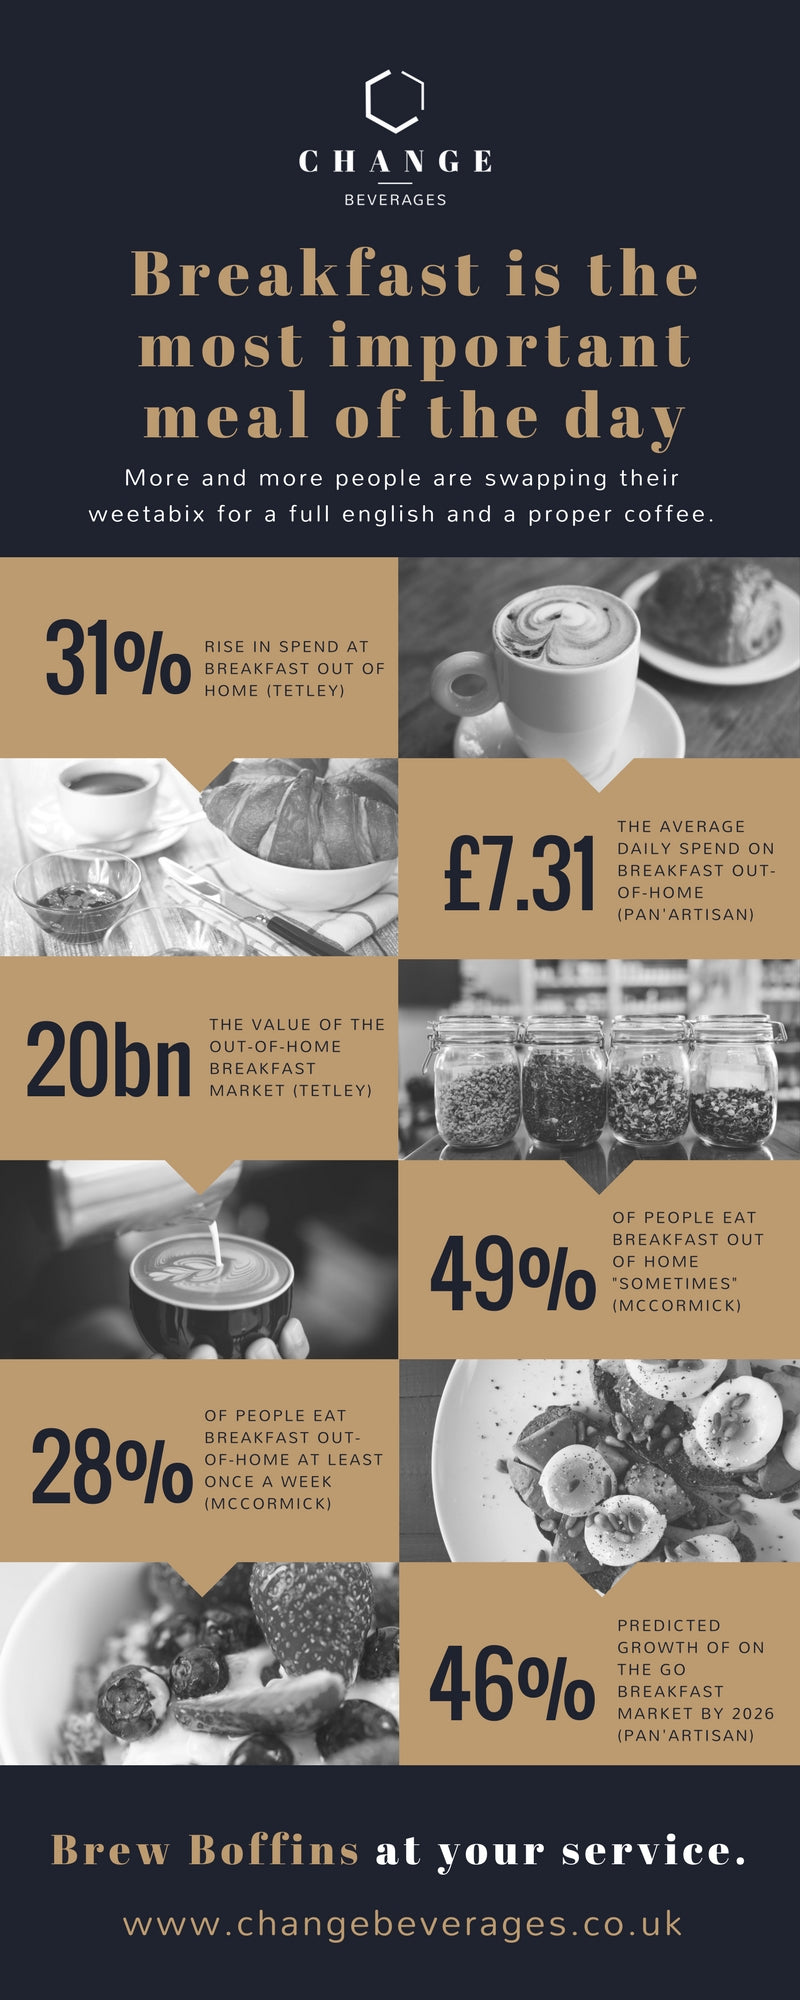 Breakfast is the most important meal of the day infographic